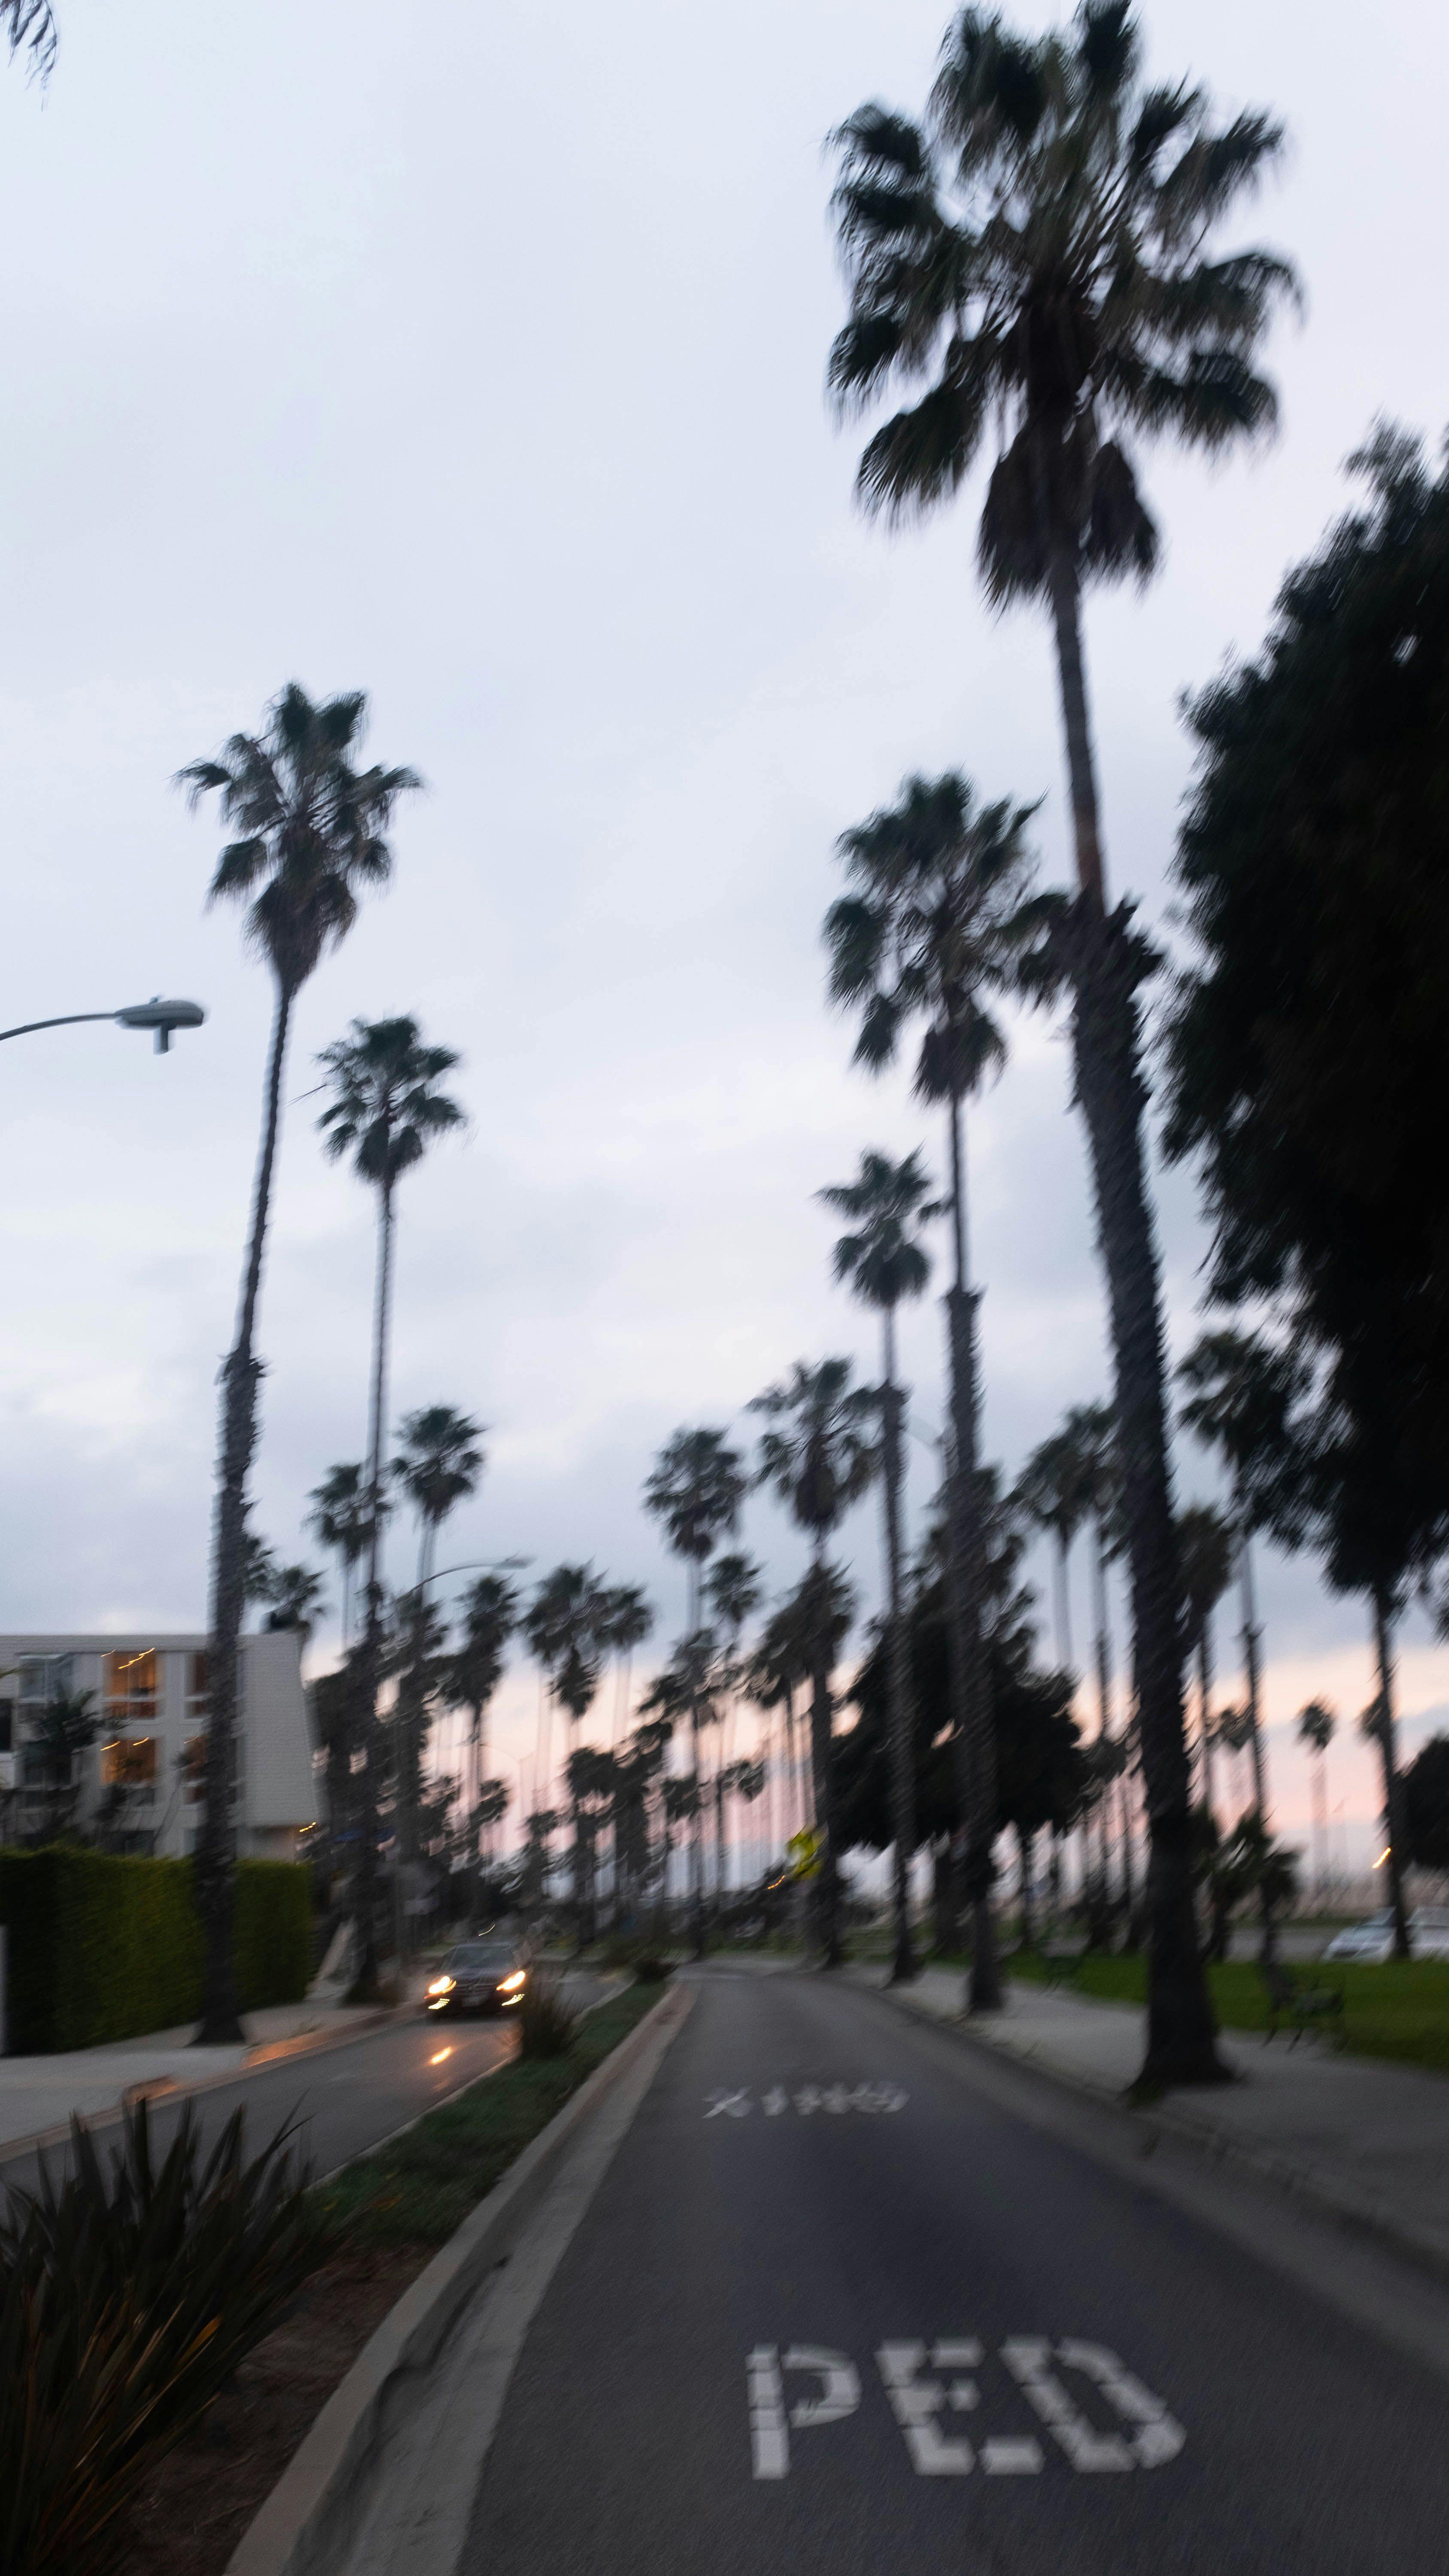 Blurry palm trees on an empty street